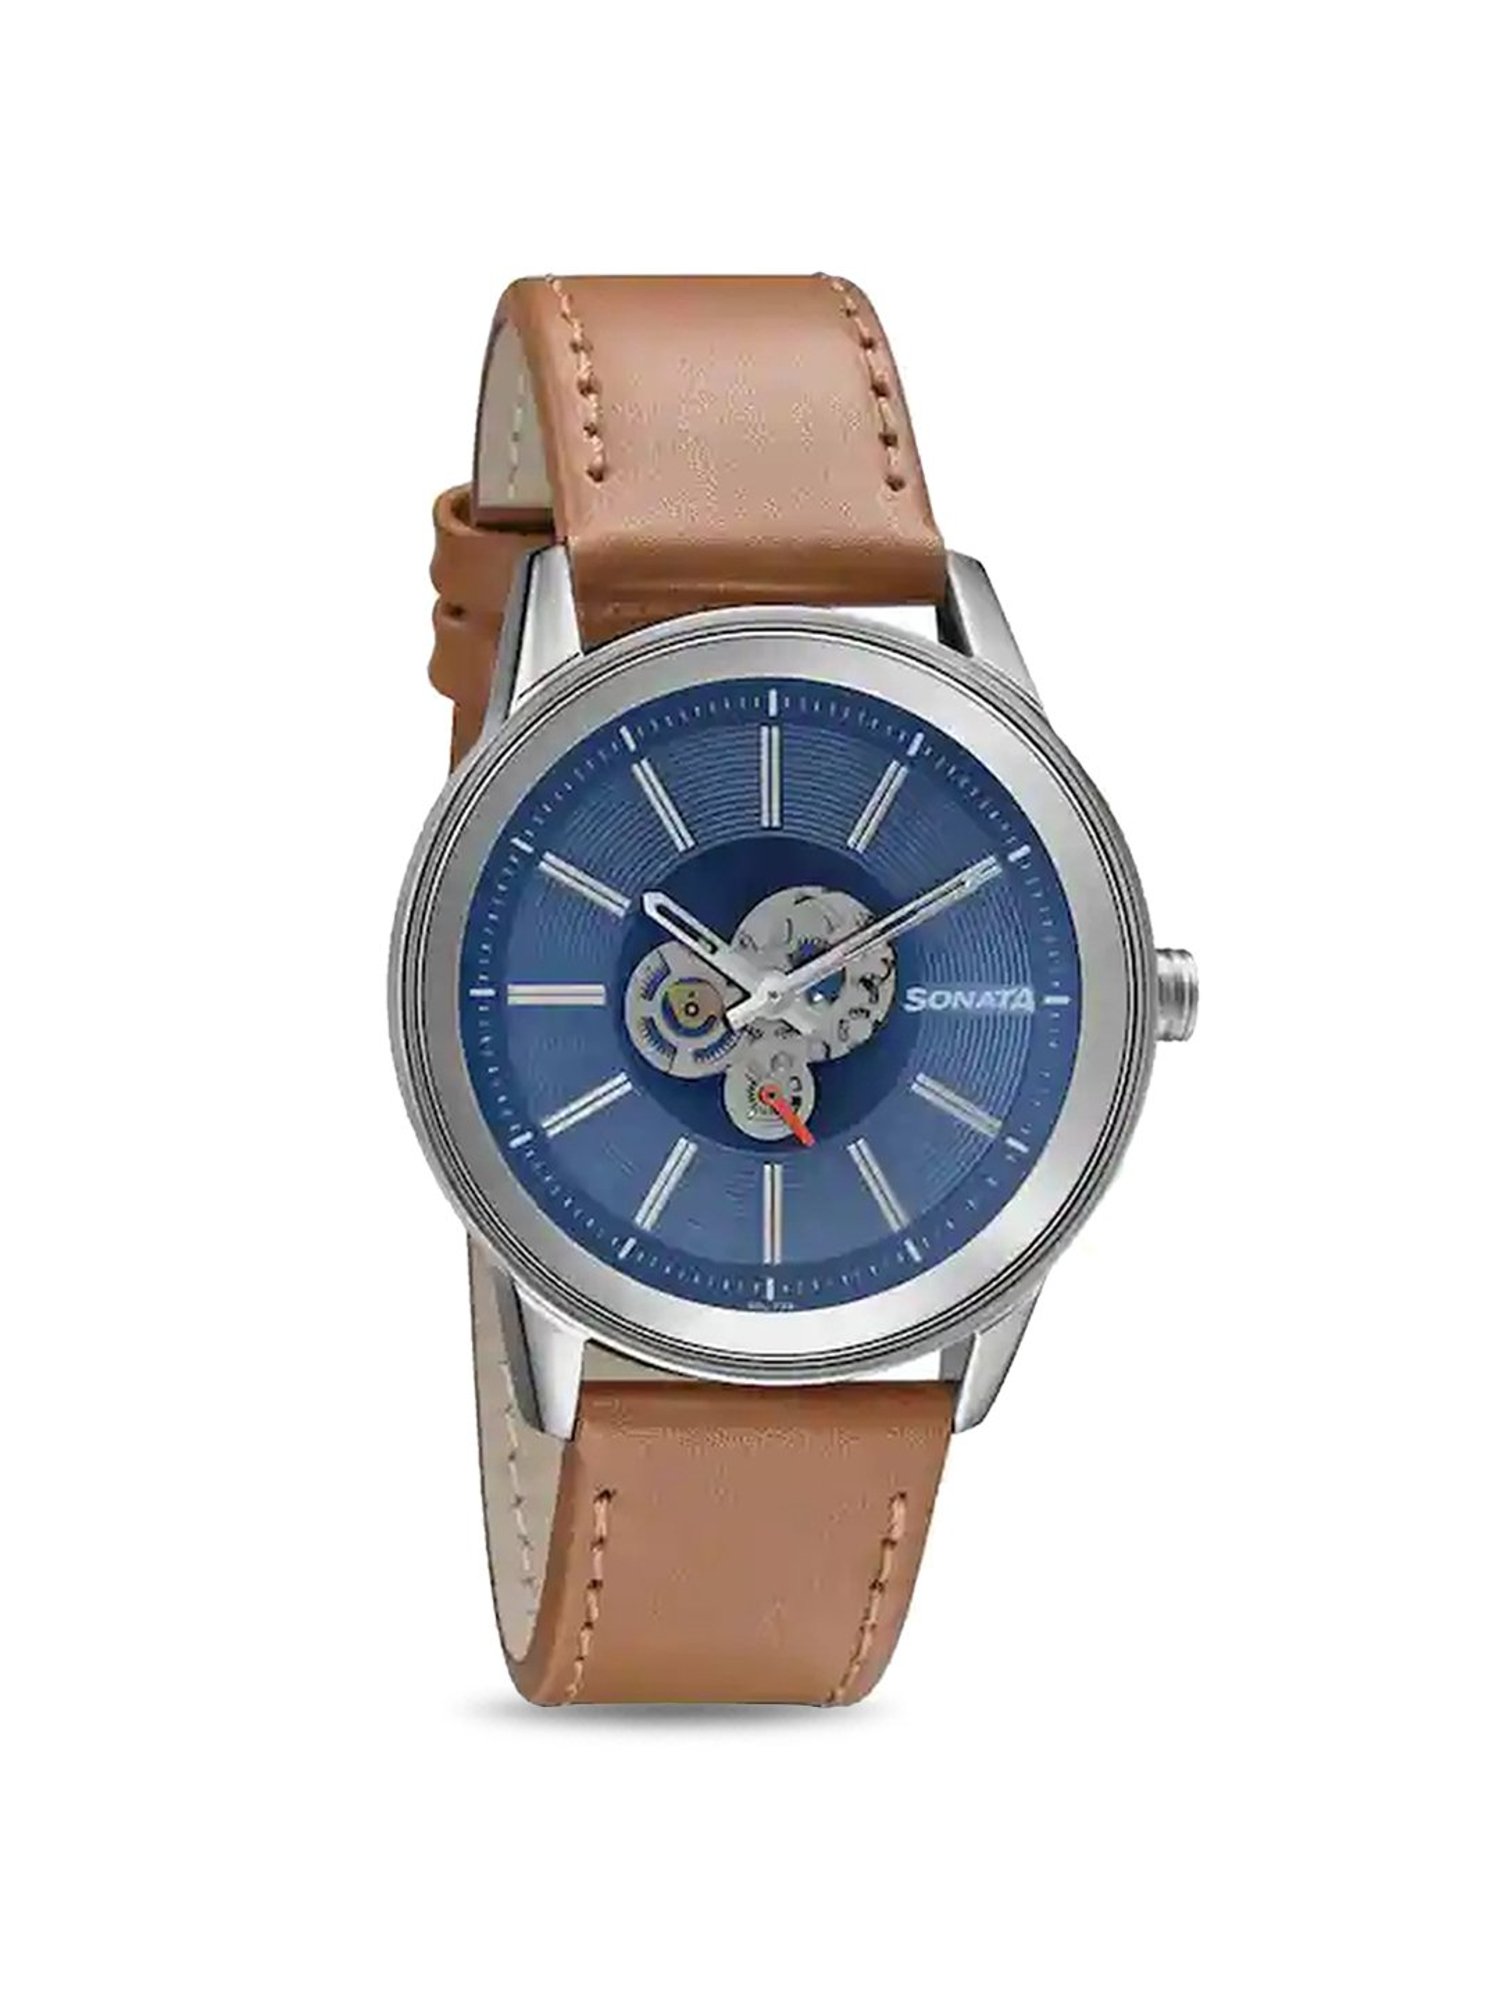 Sonata Automatic Watches - Buy Sonata Automatic Watches online in India